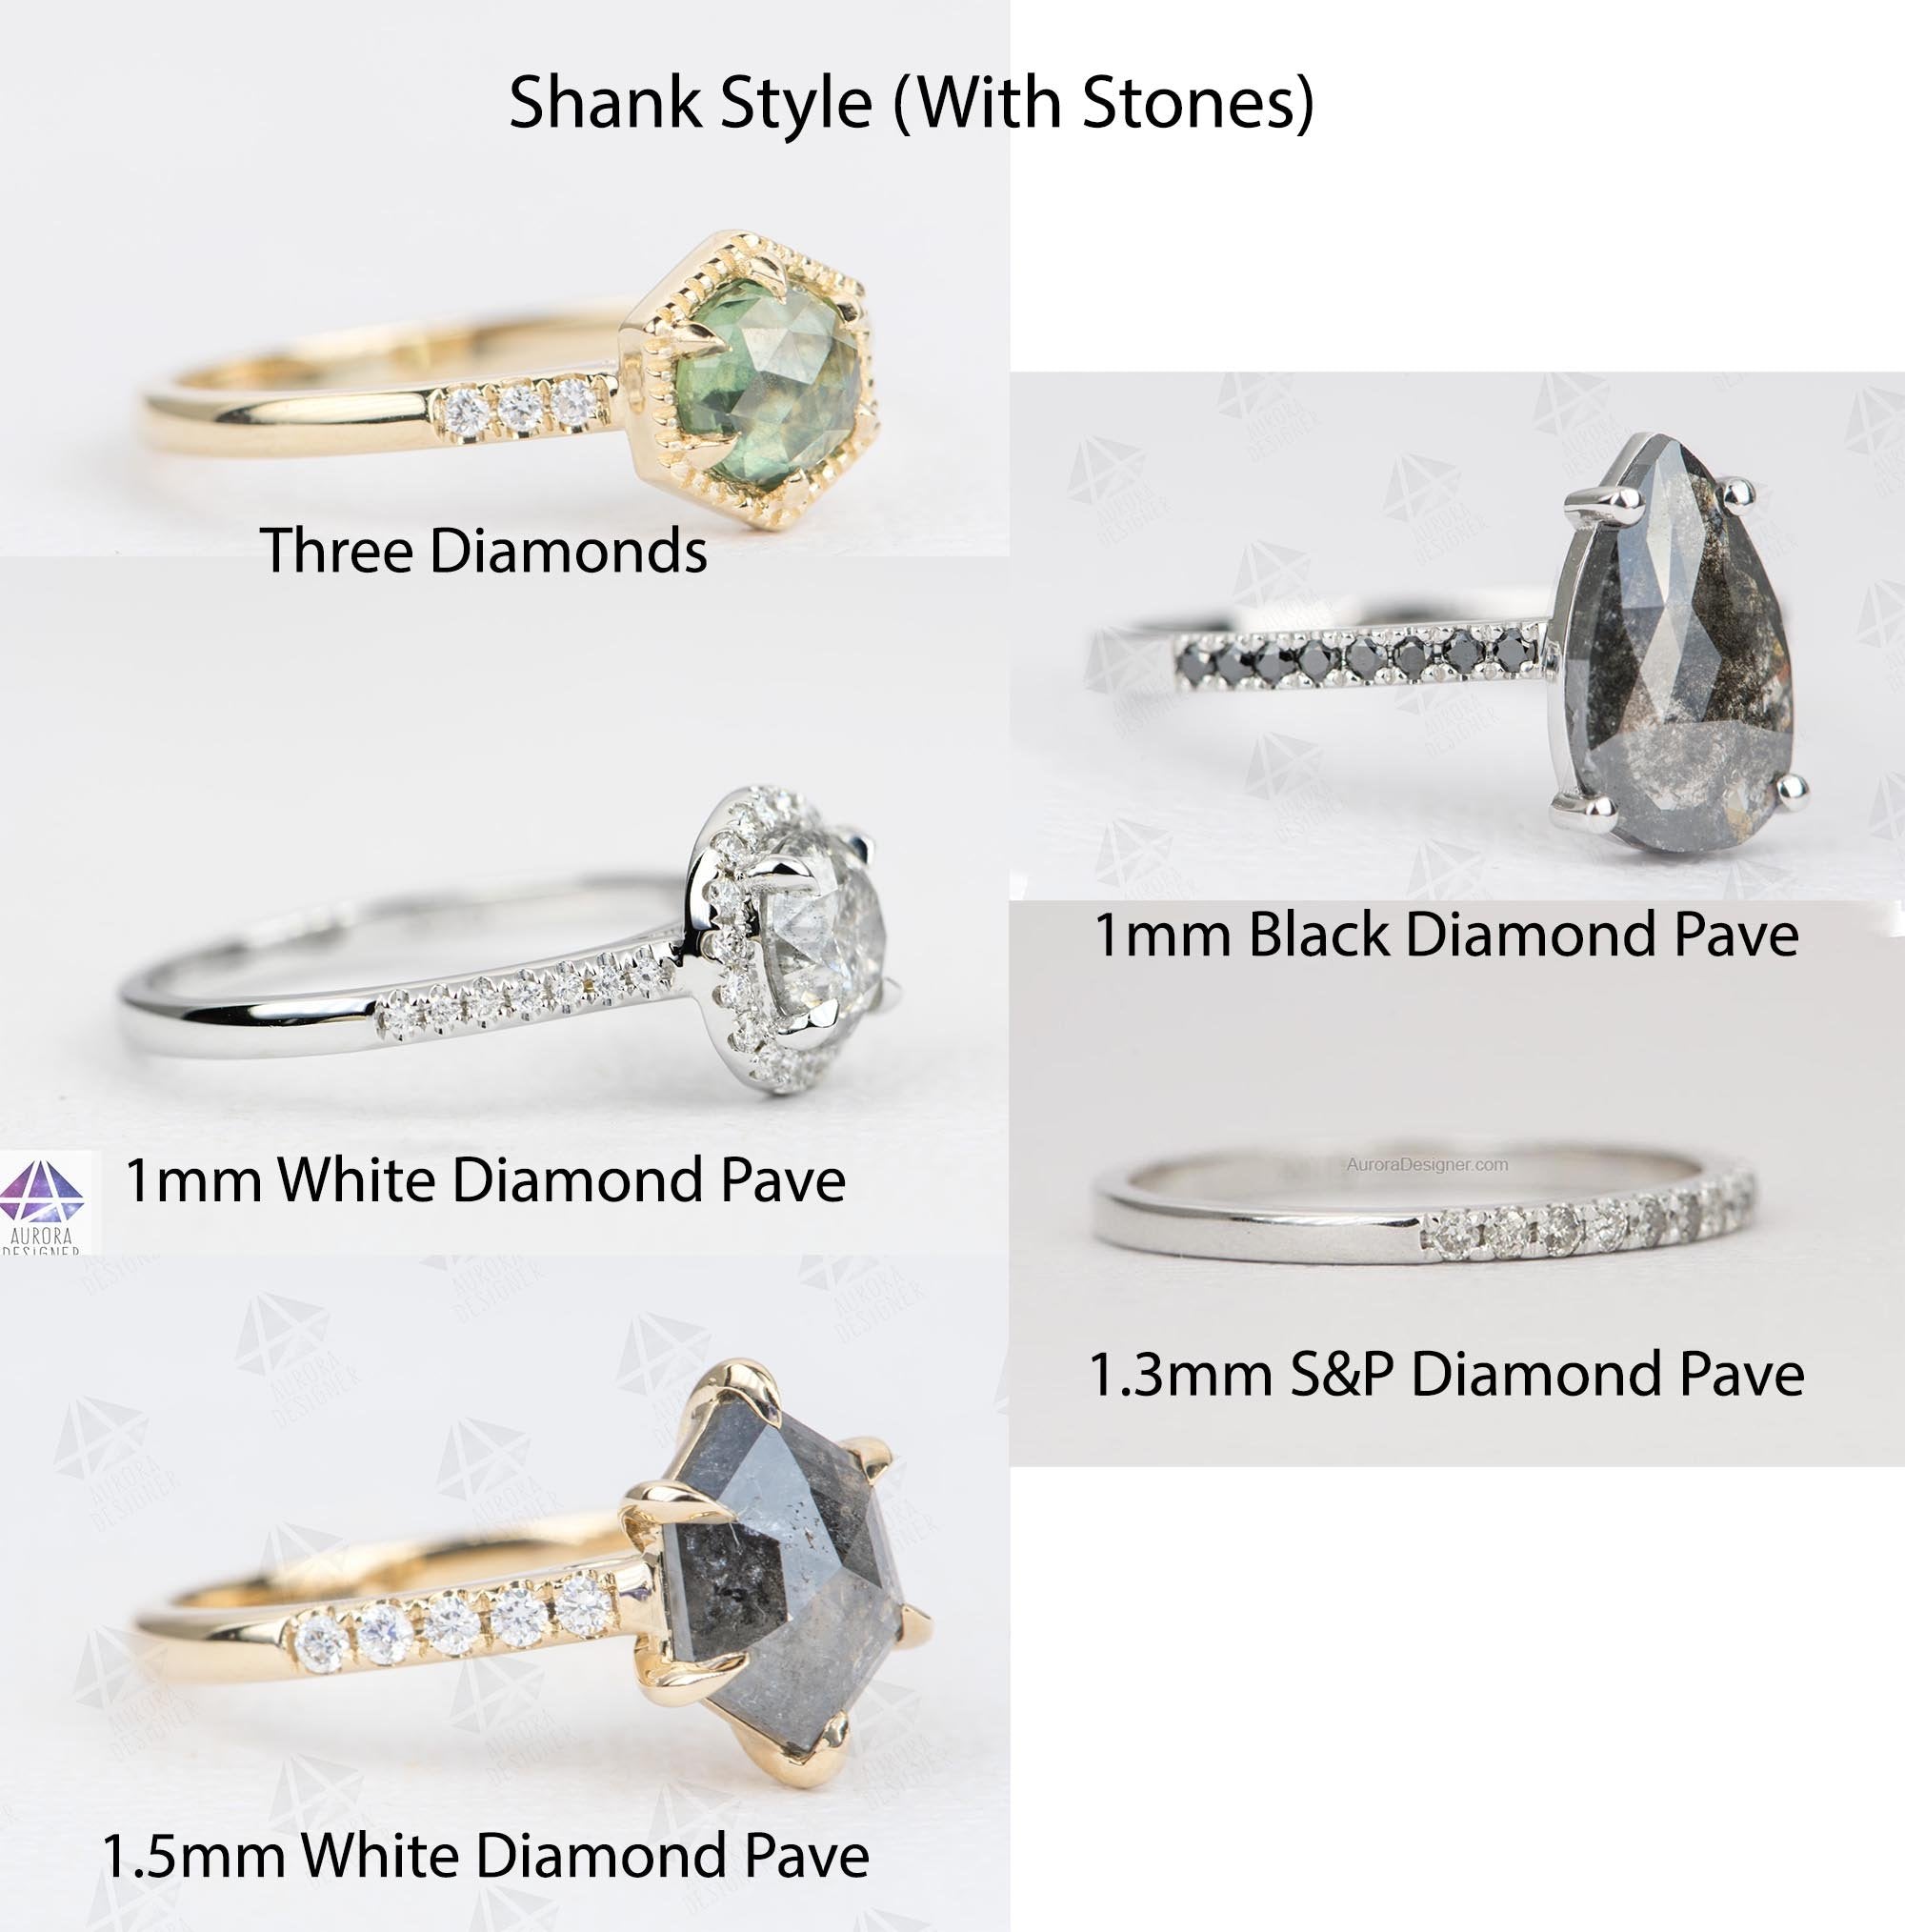 6 Ring Styles You Should Know [Infographic] | Fashion rings, Types of rings,  Jewelry blog